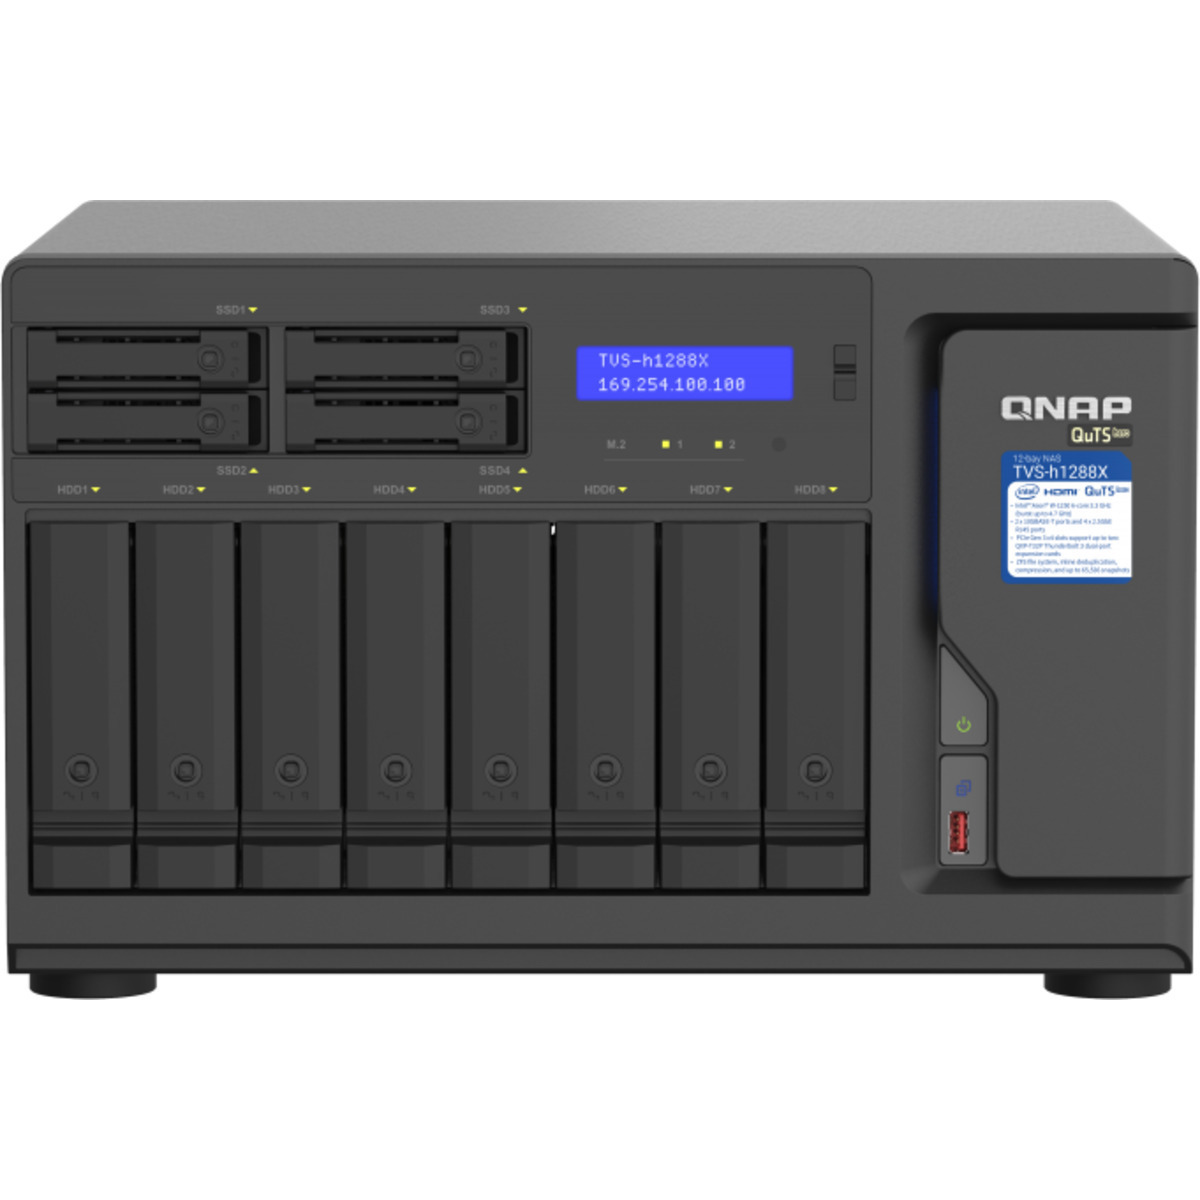 QNAP TVS-h1288X QuTS hero NAS 64tb 8+4-Bay Desktop Multimedia / Power User / Business NAS - Network Attached Storage Device 8x8tb Seagate IronWolf ST8000VN004 3.5 7200rpm SATA 6Gb/s HDD NAS Class Drives Installed - Burn-In Tested TVS-h1288X QuTS hero NAS